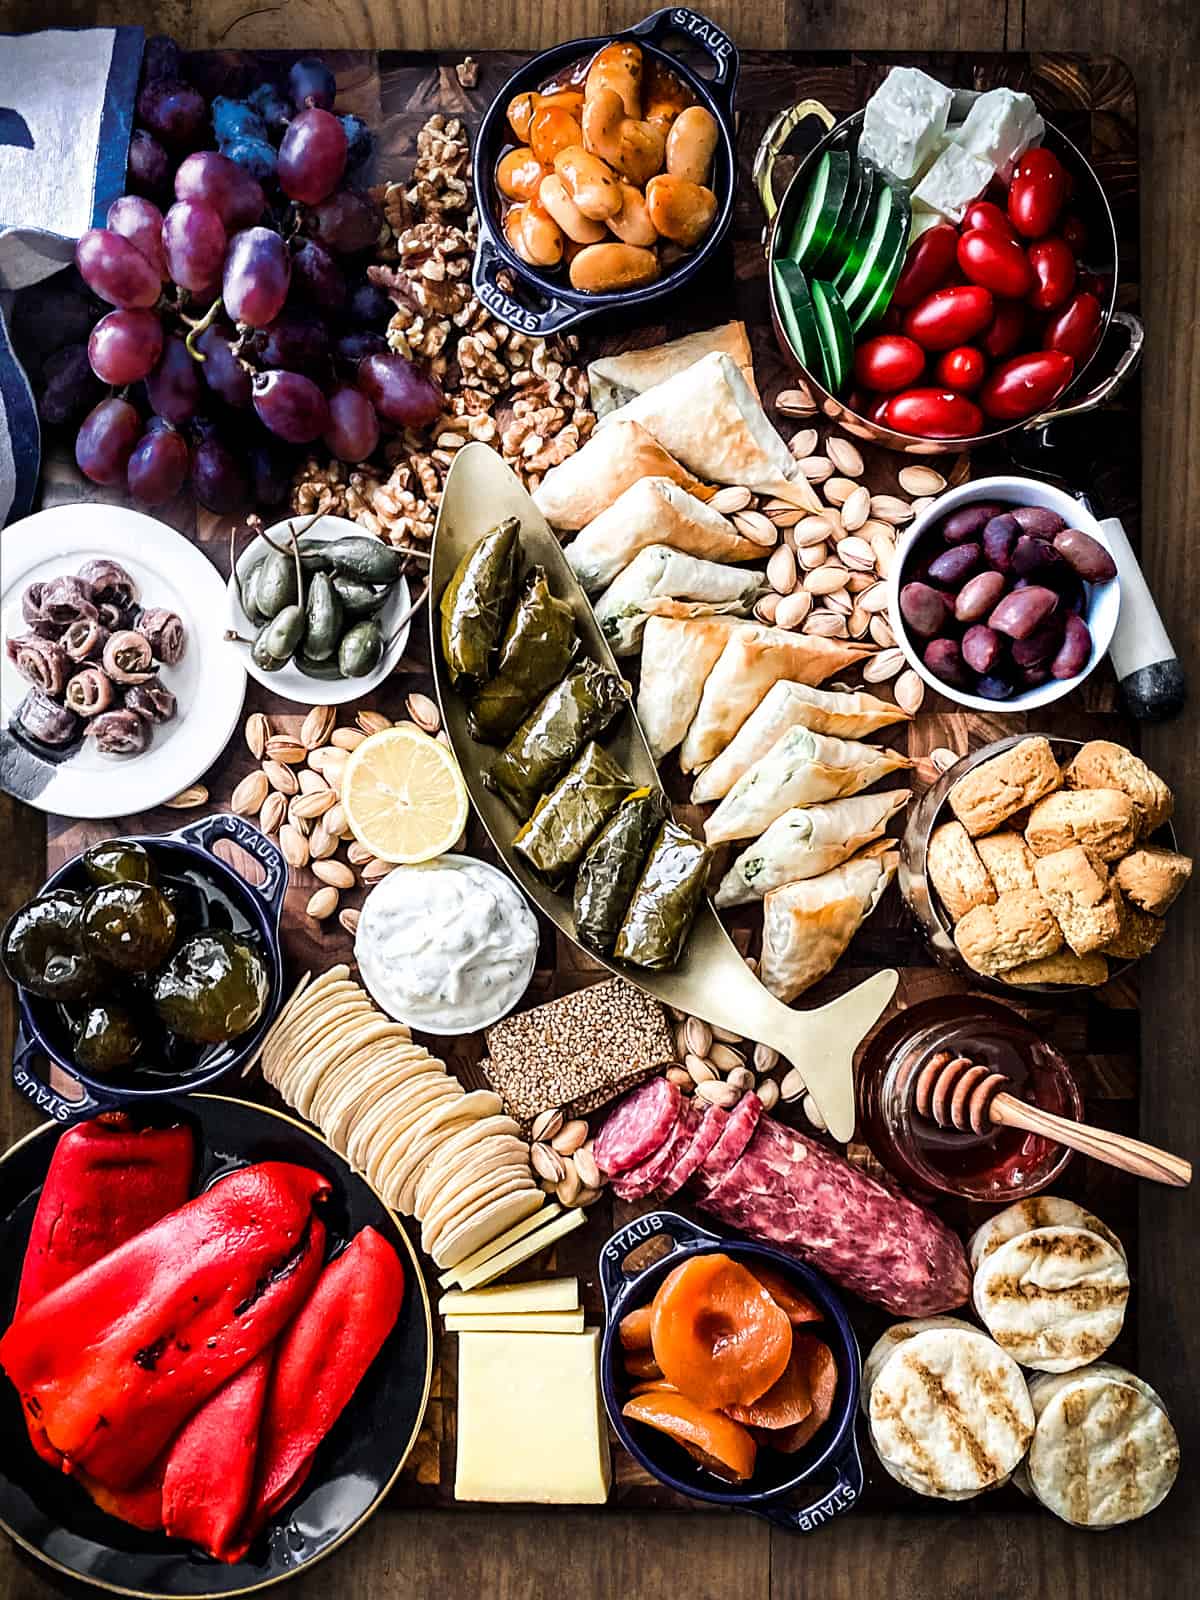 Grapes, walnuts, a small bowl with beans, a fish shaped bowl with dolmades, a salami, some pastel, a pot with preserved apricots, a pot of honey, a small pot with fig preserves, some pistachios, round wafers, a side view of roasted peppers on a plate and side view of tzatziki dip and anchovies.